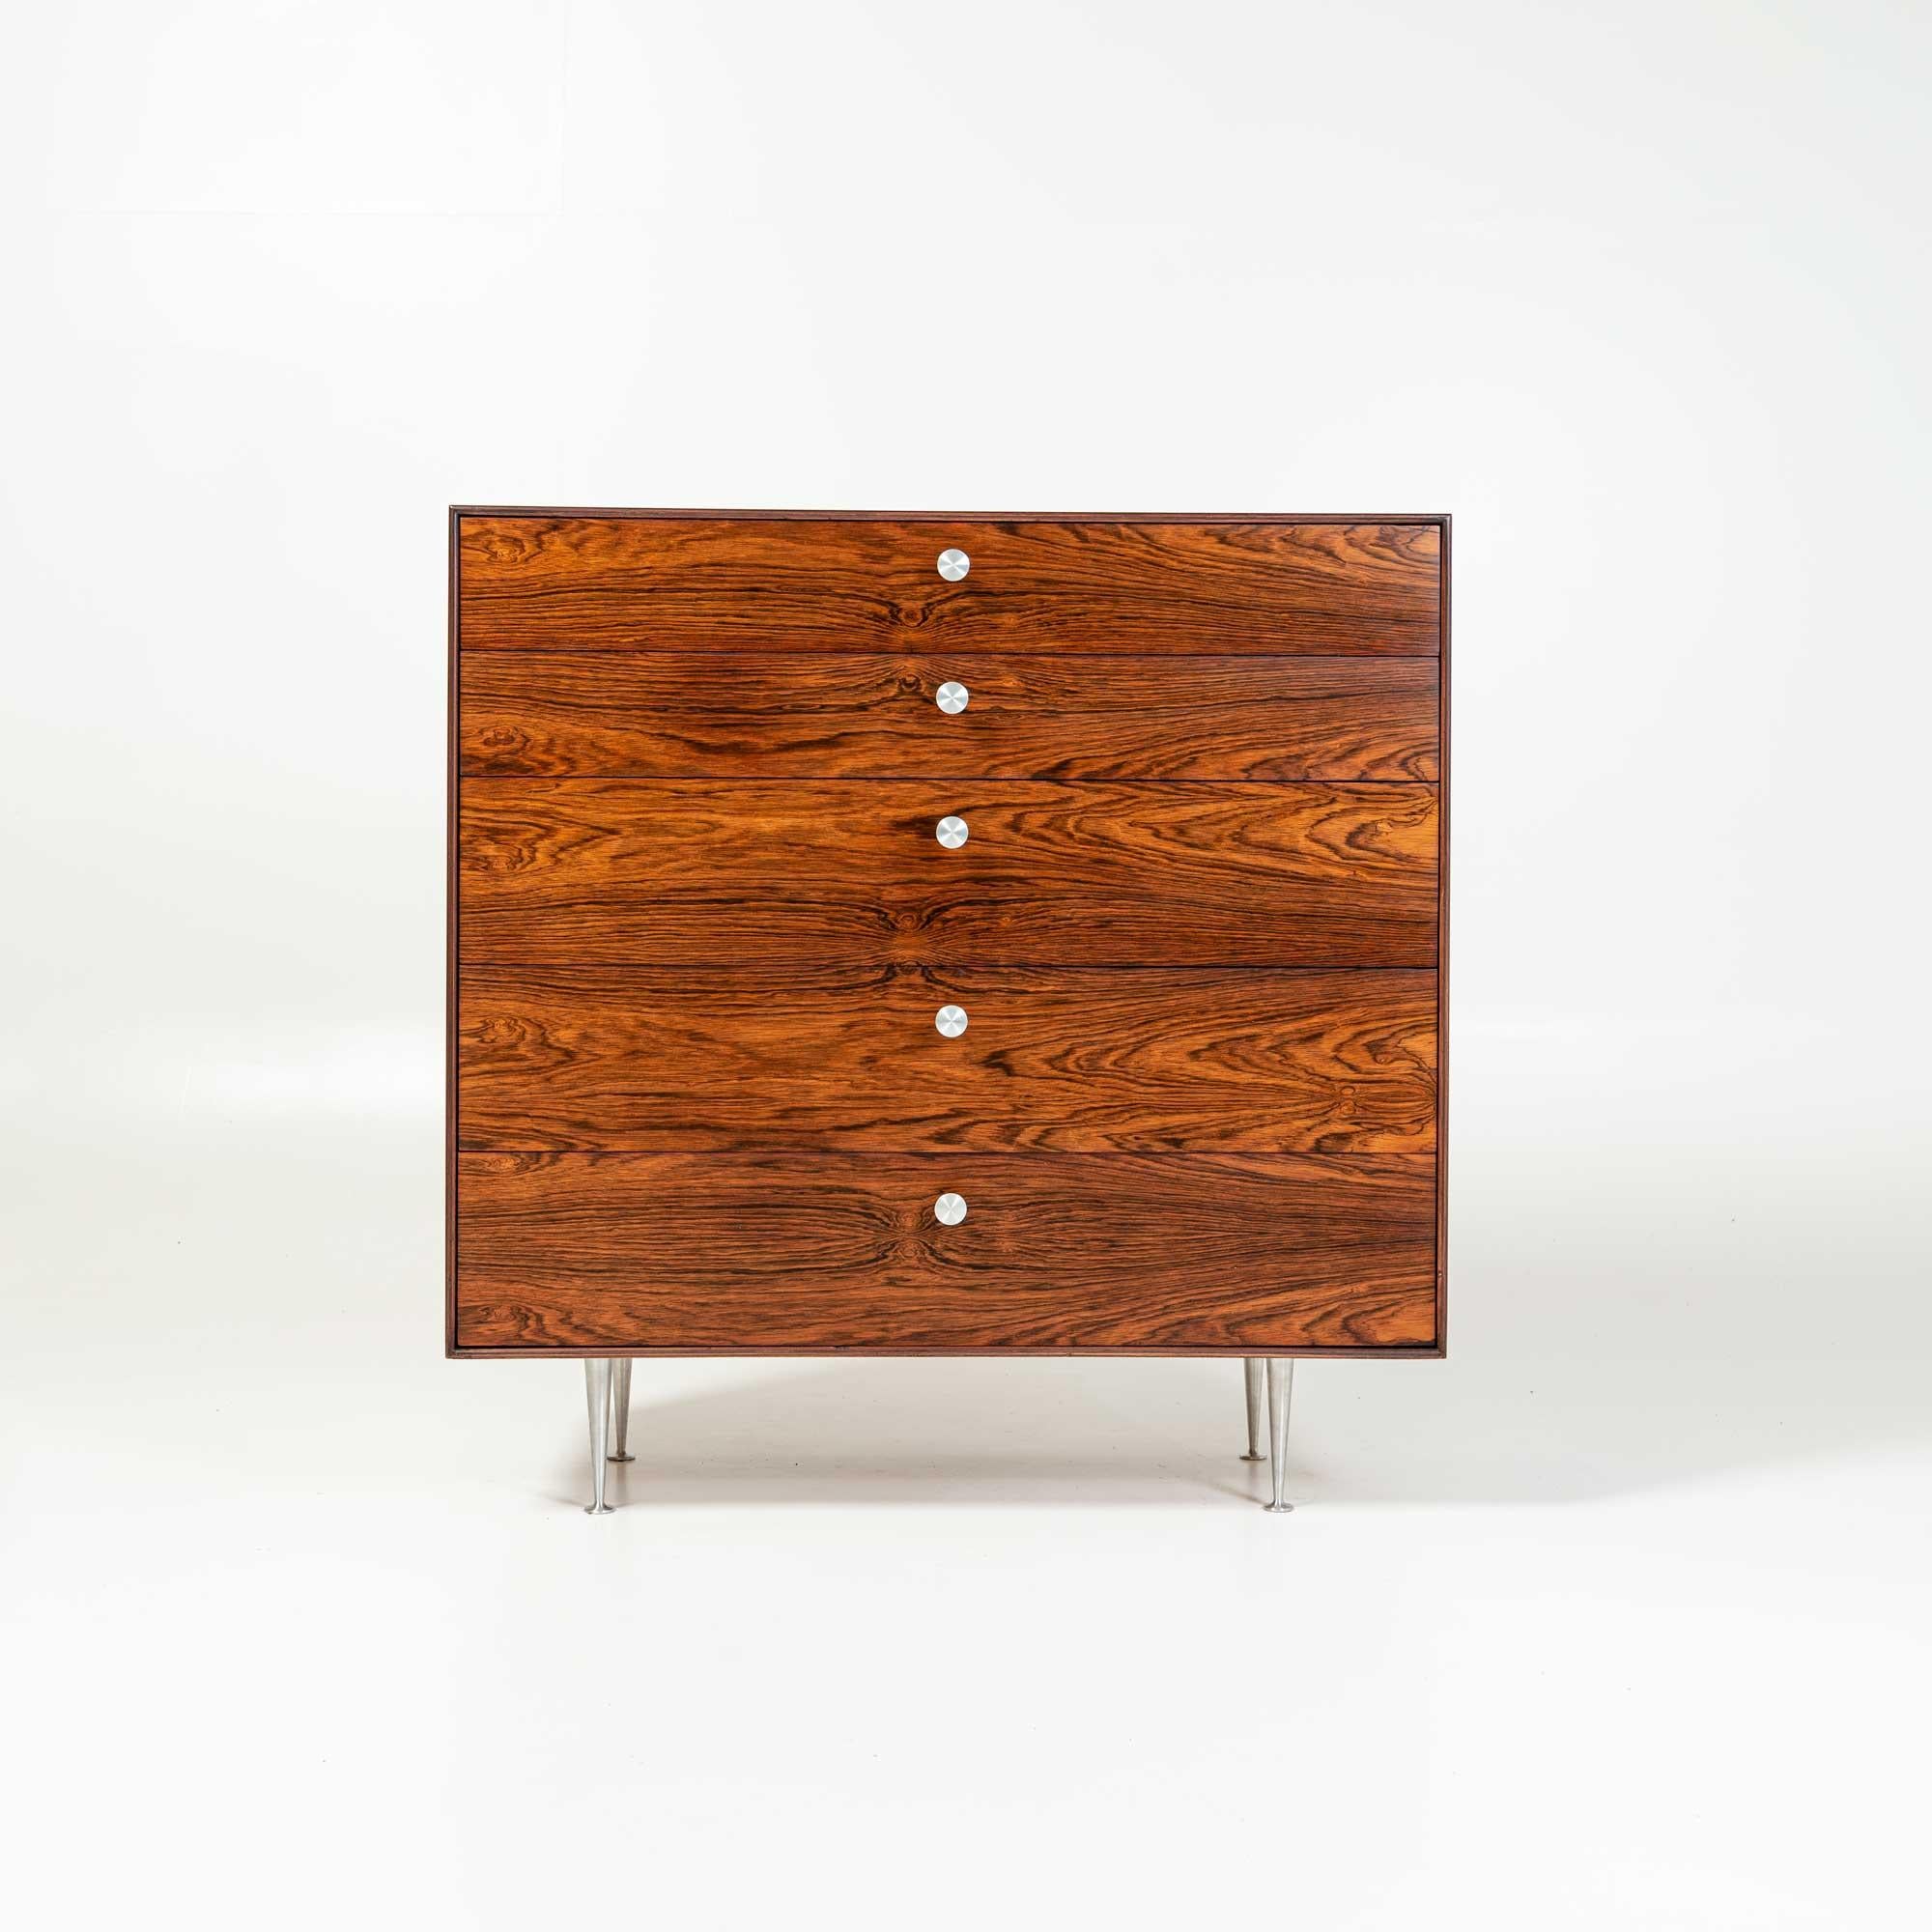 A rare George Nelson five drawer thin edge rosewood dresser, circa 1955. This stunning piece has dynamic rich rosewood graining and features five drawers with metal pulls and the iconic thin edge leg. Foil label inside drawer (George Nelson for